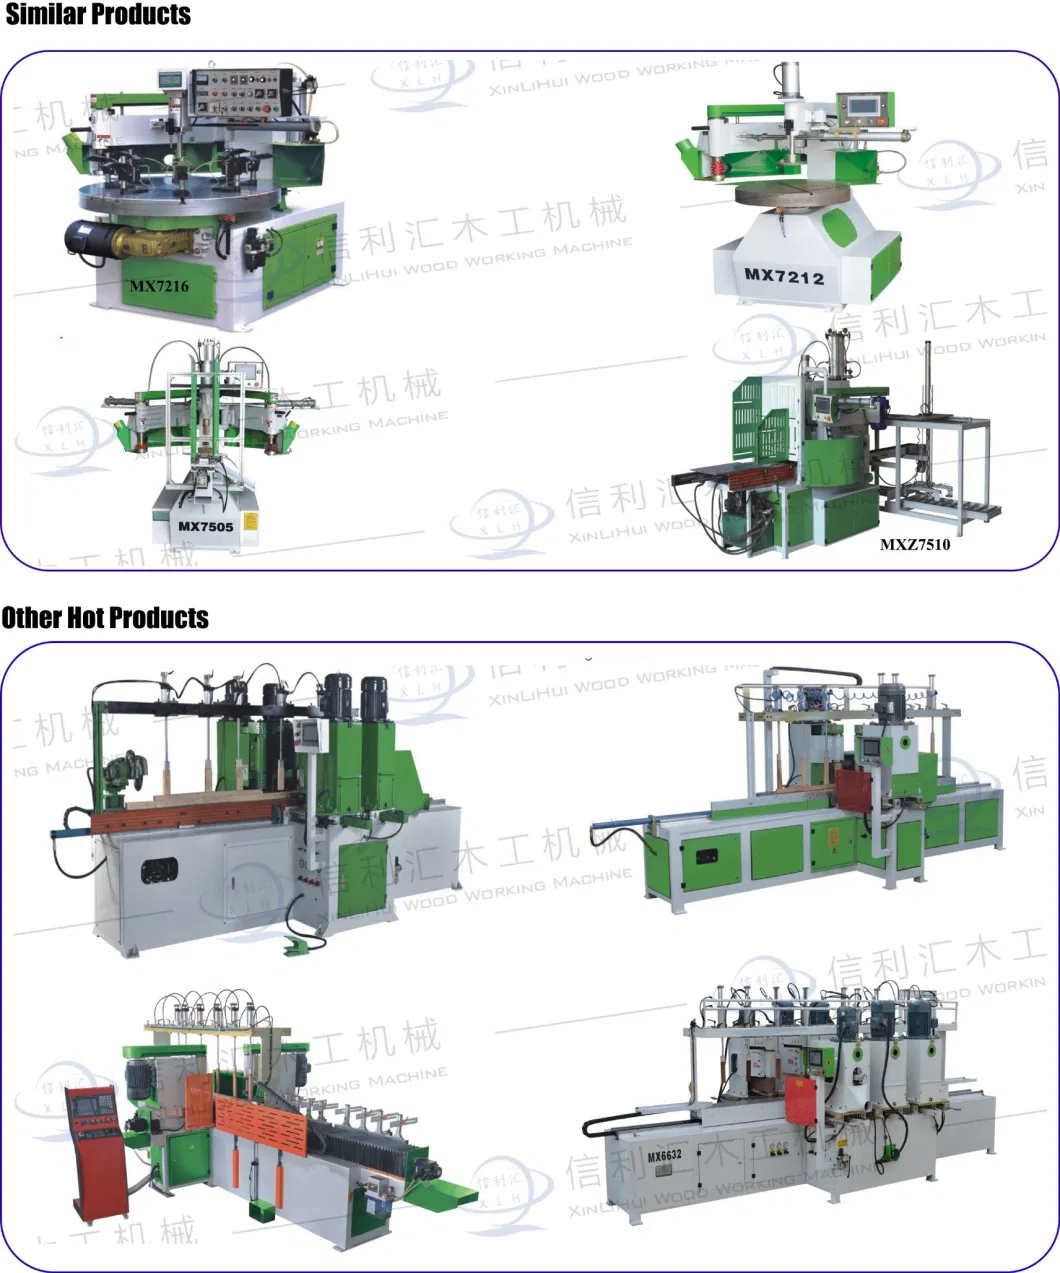 Gantry Wood Shaper Router Machine Six Sided Drilling Machine CNC Router CNC Six-Sides Drilling Machine 3D Engraving Cutting Linear Atc CNC Router Machine Price